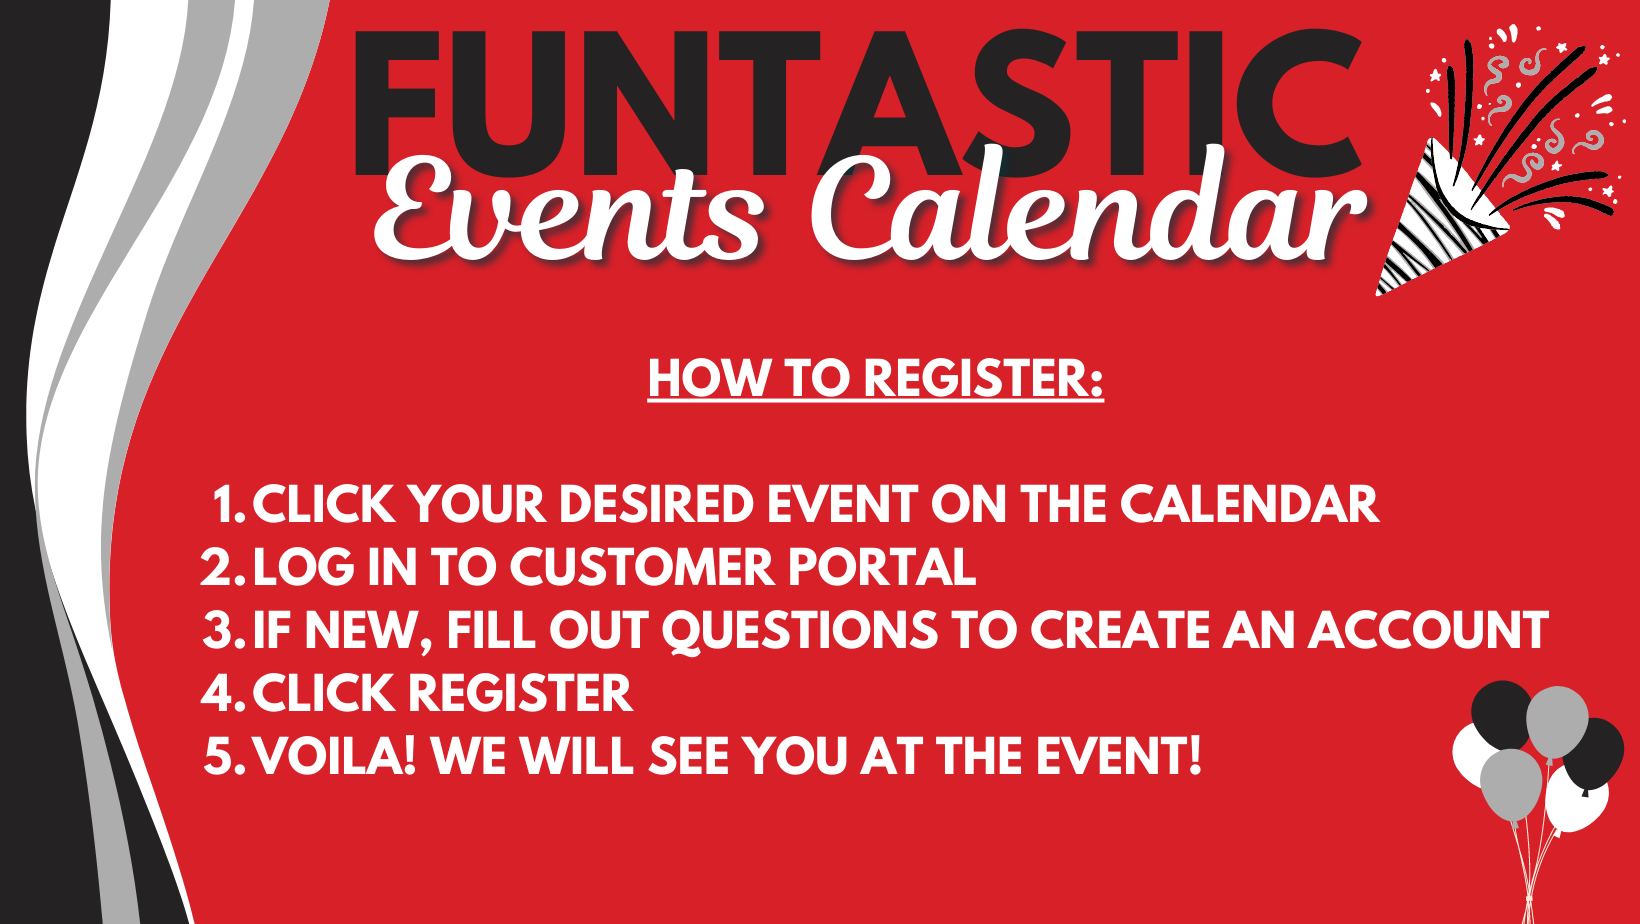 FUNTastic Events How To